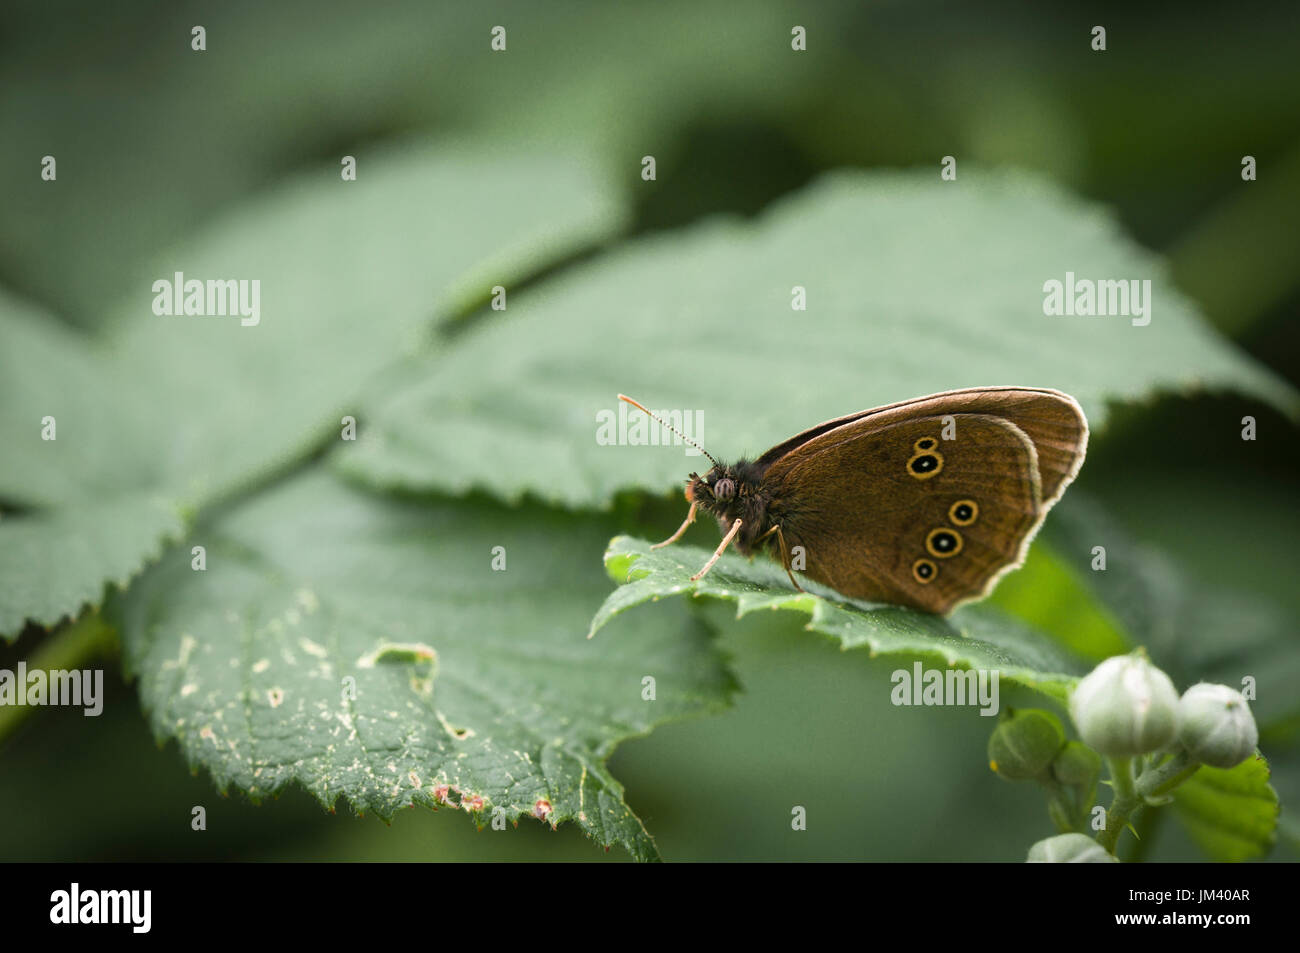 A close up image of a Ringlet Butterfly, Aphantopus hyperantus, at rest on a leaf in the woodland at Potteric Carr Nature Reserve, Yorkshire, England Stock Photo